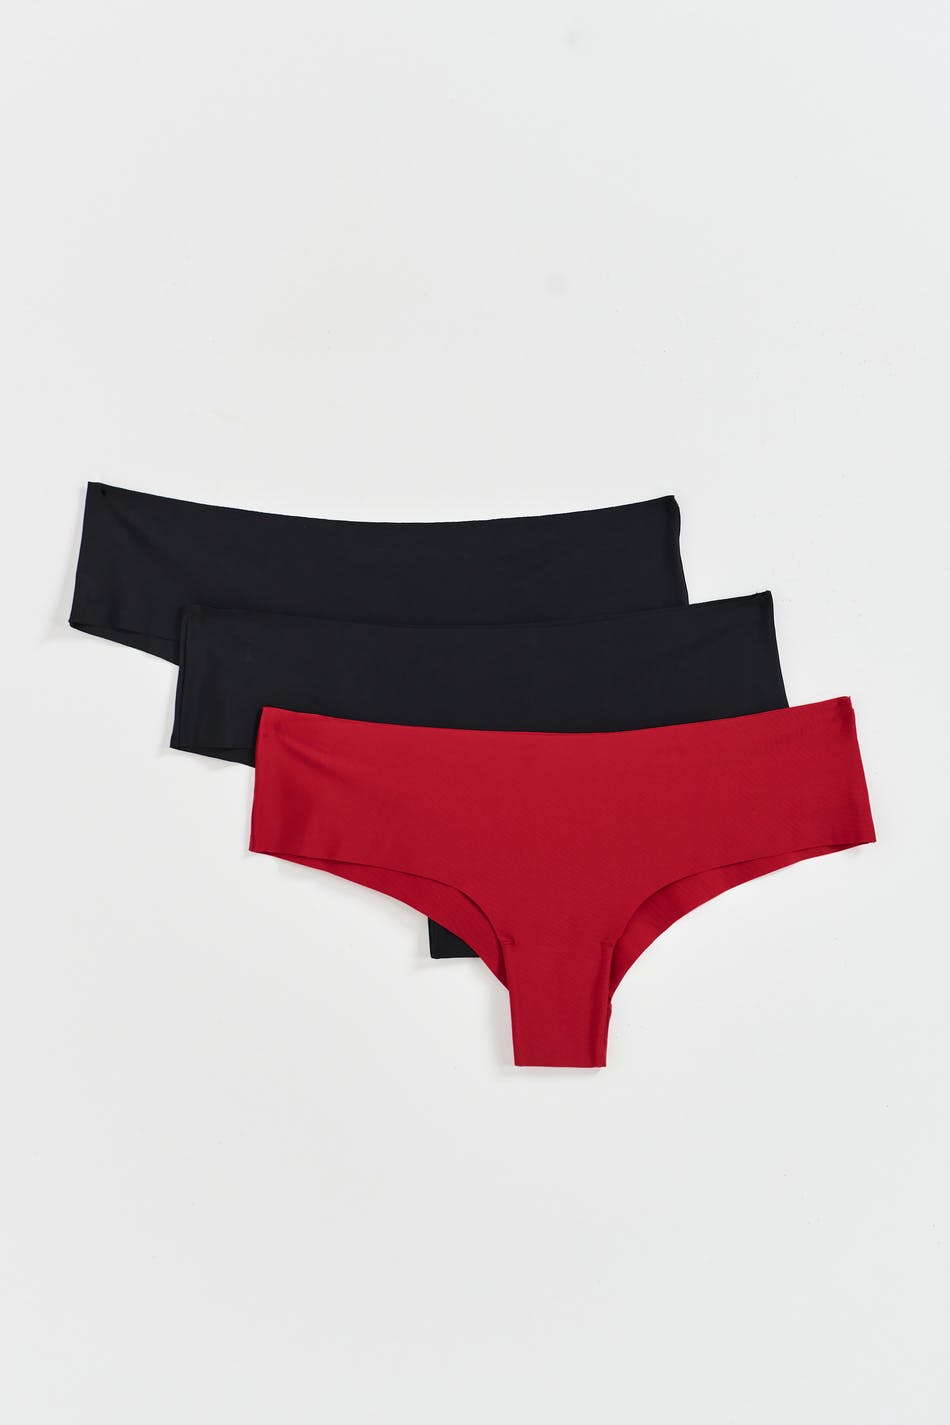 Gina Tricot - 3-pack invisible brazilian - trosor-3-pack - Red - XS - Female